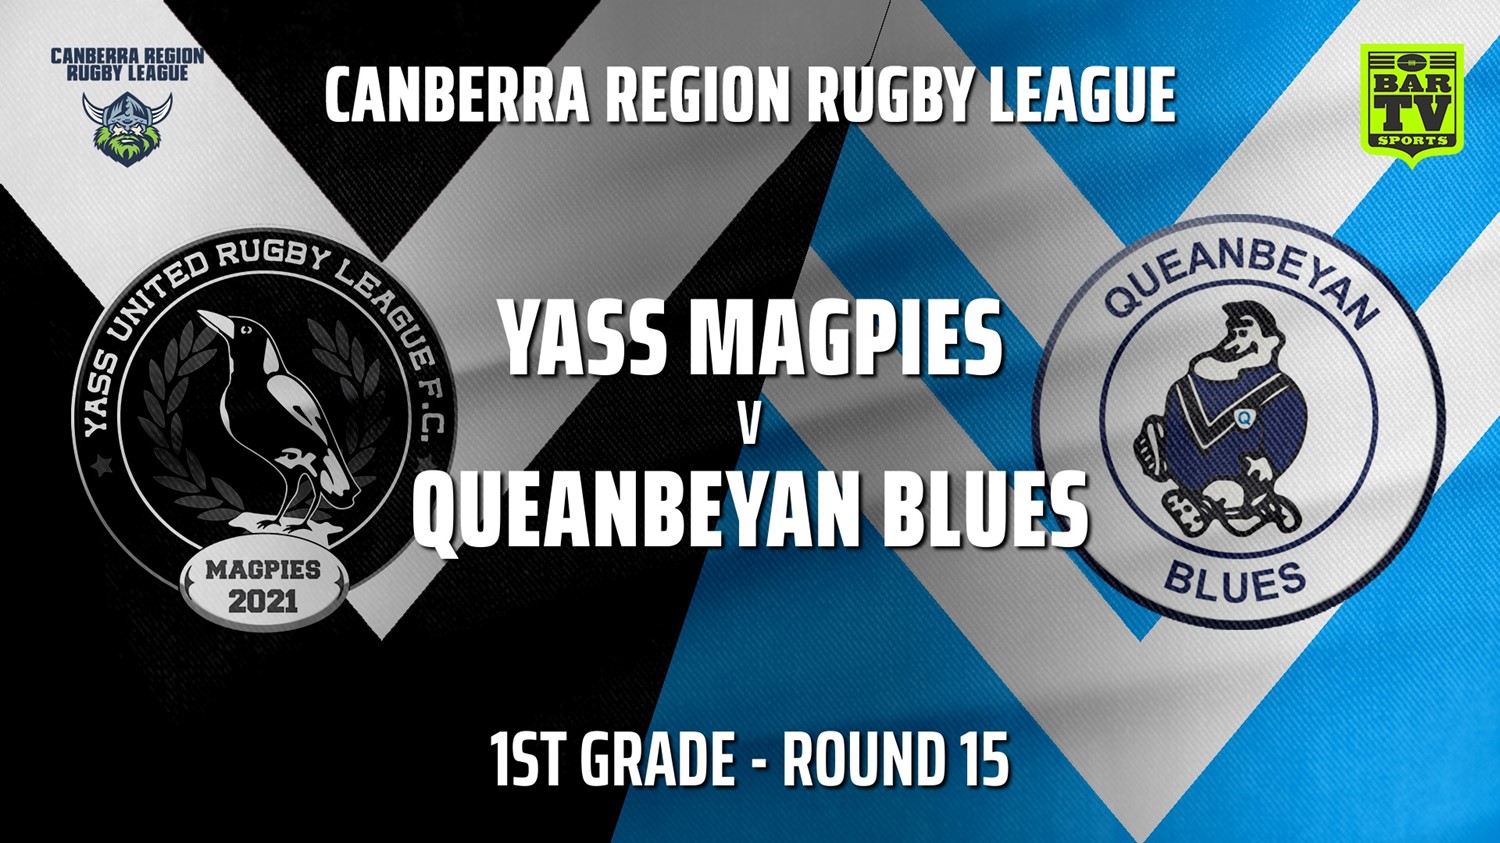 210807-Canberra Round 15 - 1st Grade - Yass Magpies v Queanbeyan Blues Slate Image